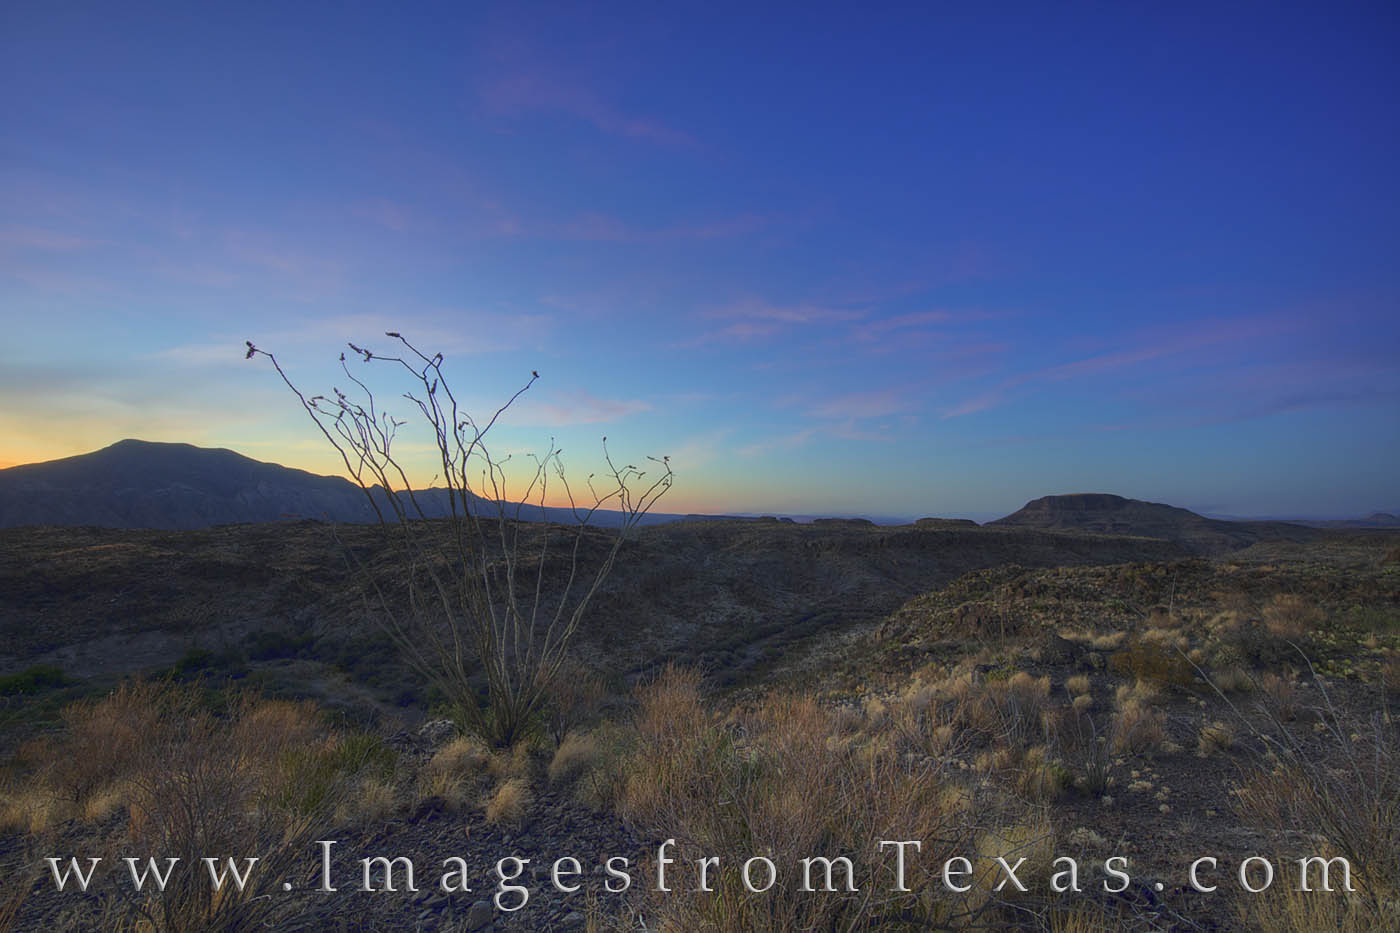 Sunrise comes to the interior of Big Bend Ranch State Park. This remote section of west Texas is seldom seen by tourists - 35...